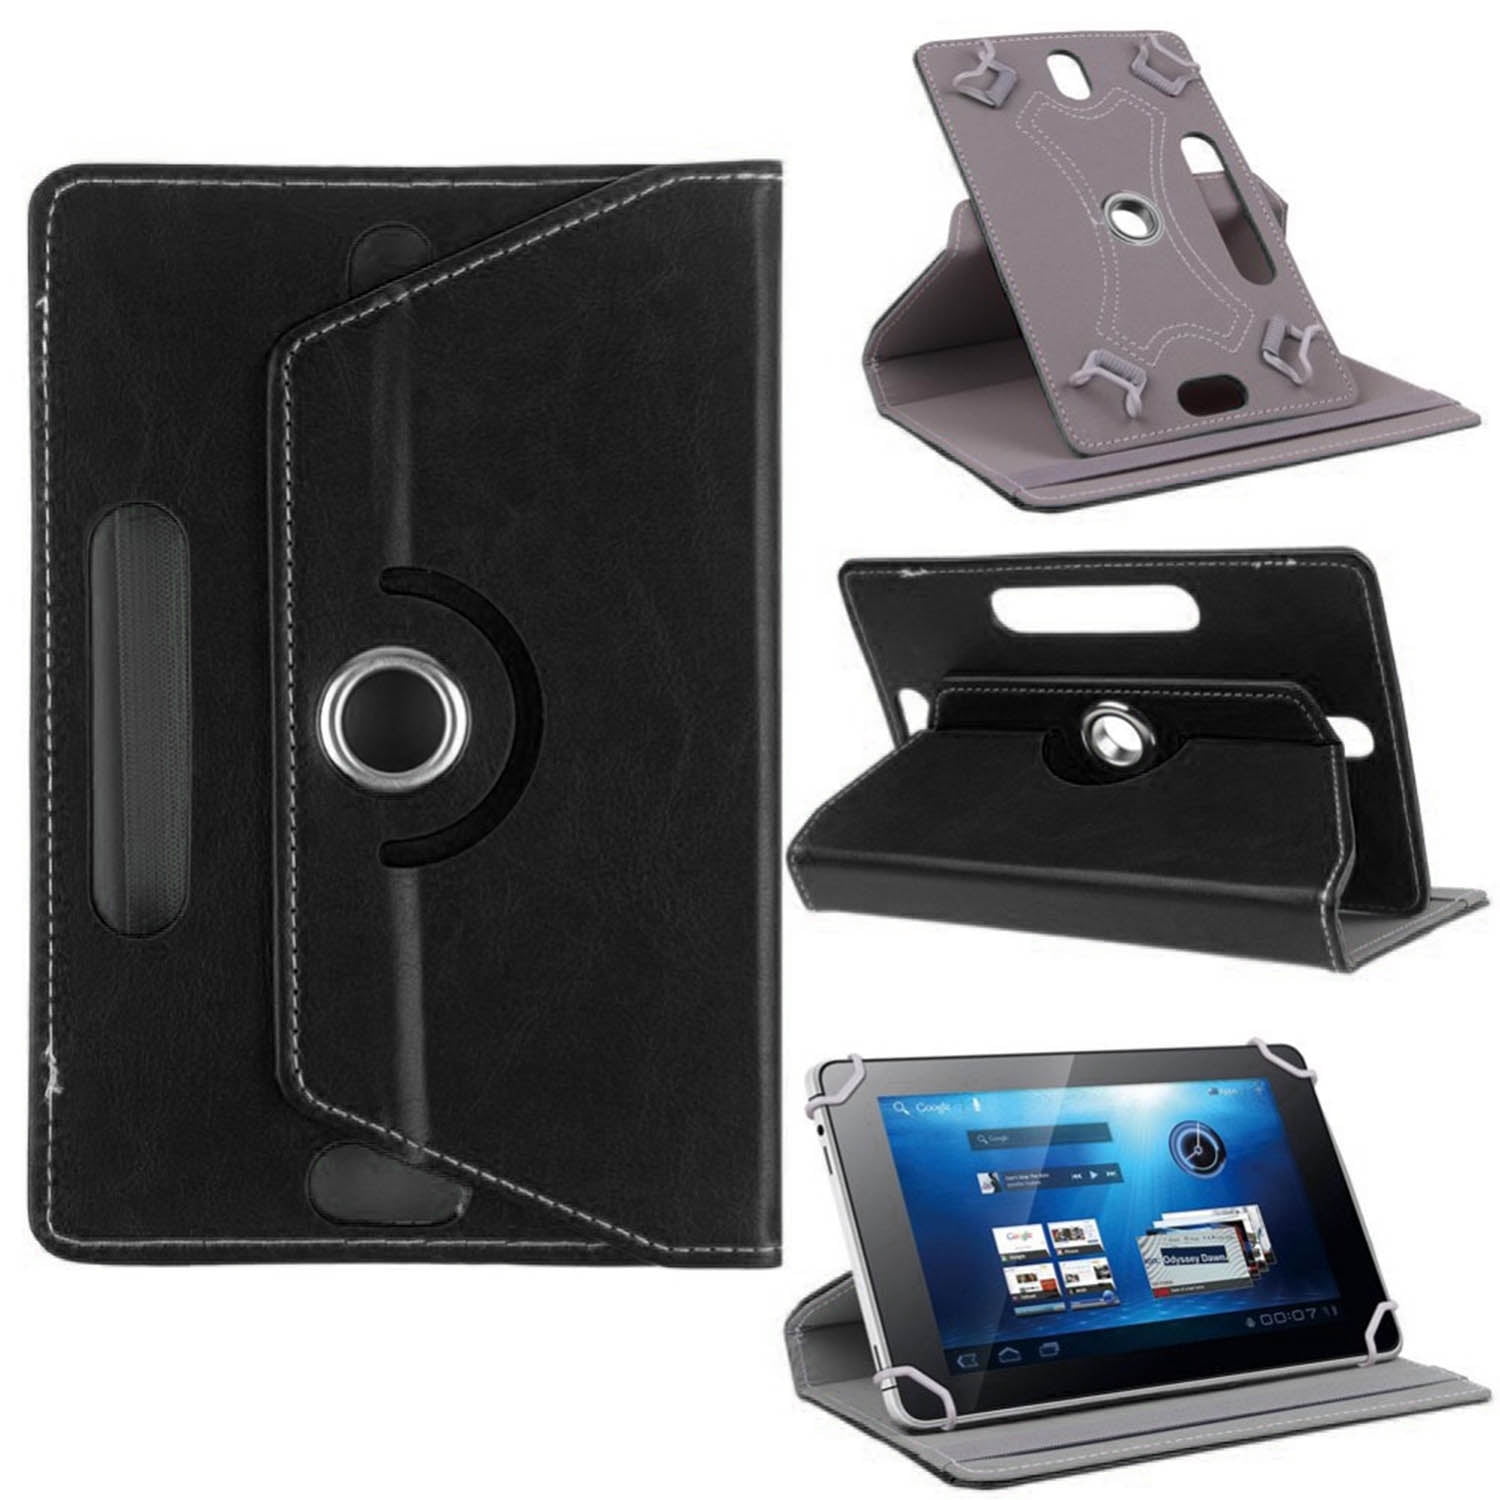 paradijs fort platform CoverON Universal 7.9 - 9 inch Screen Size Tablet Case, Multi-Angle Stand  Folio Adjustable Protective Cover Compatiable for iPad mini Samsung Galaxy  Tab Acer Lenovo - PU Leather Holder Band (Black) - Walmart.com